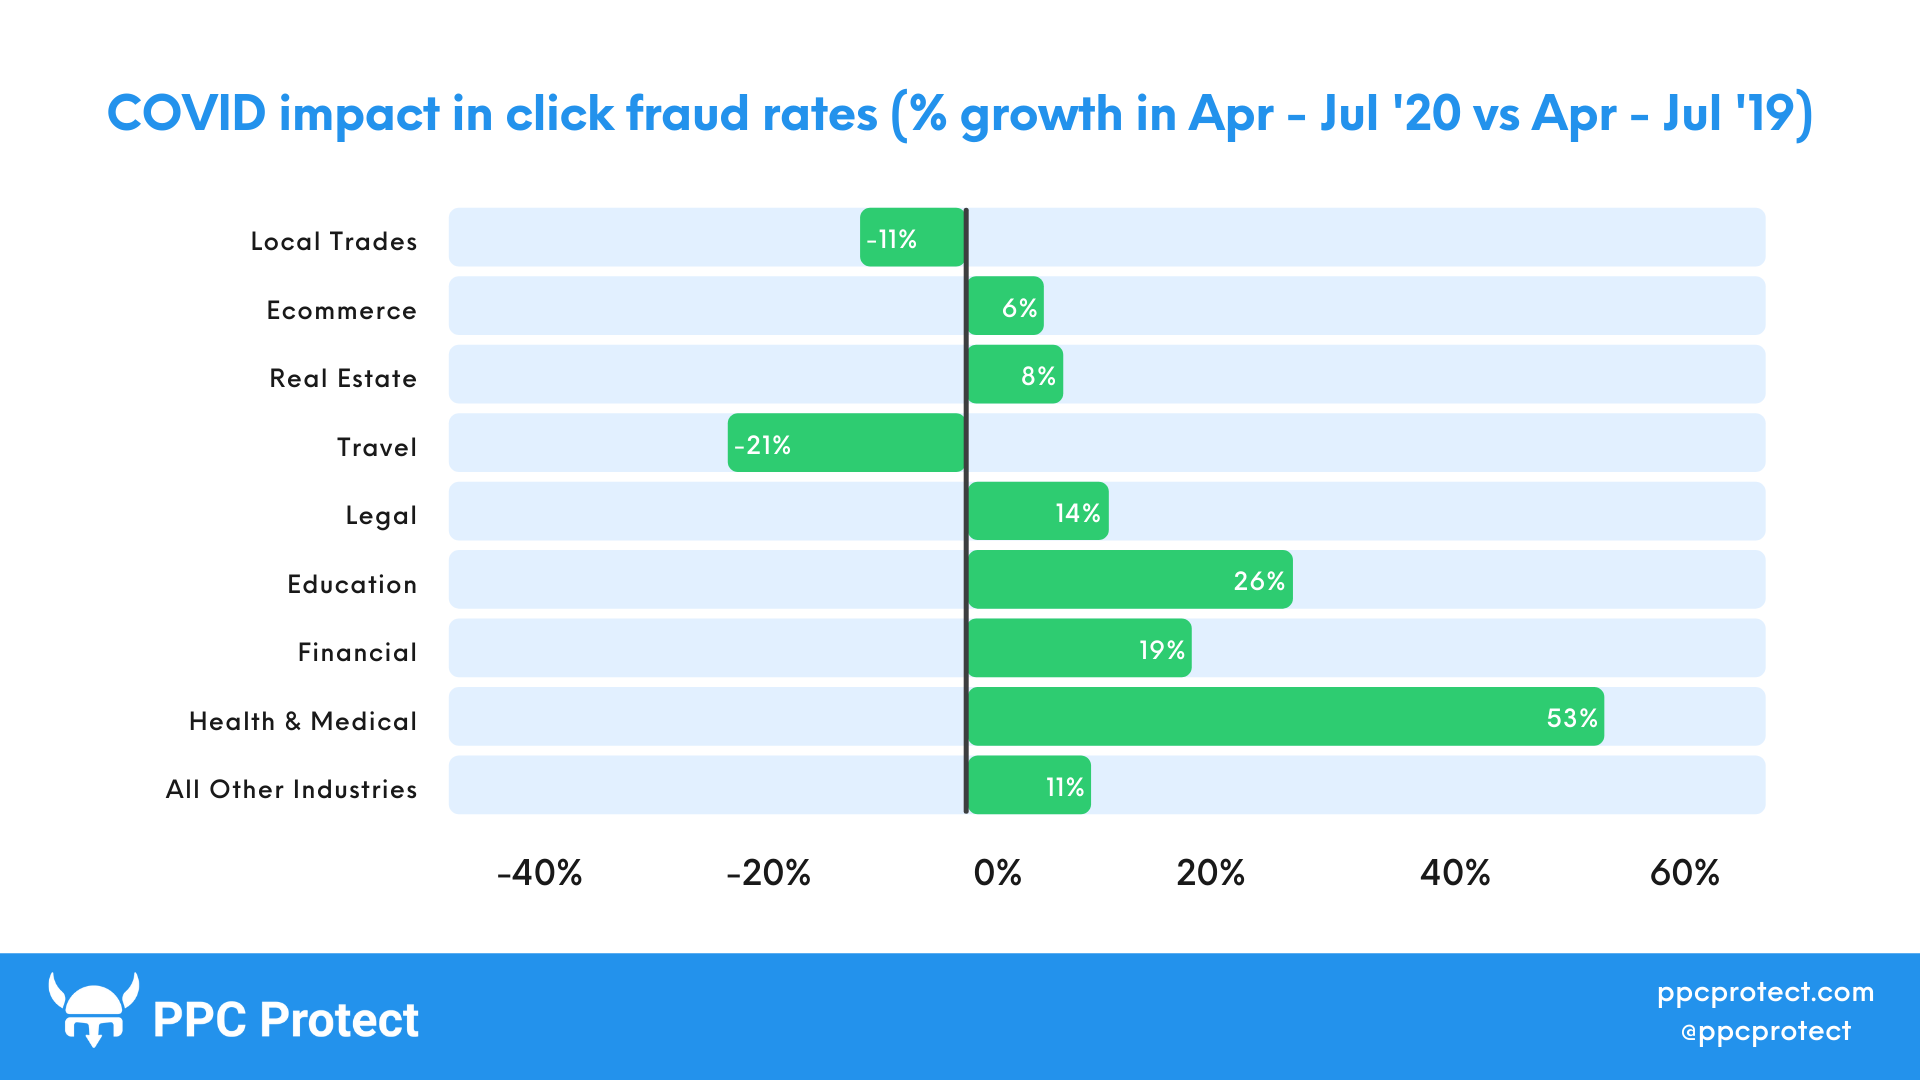 The Global PPC Click Fraud Report 2020-21